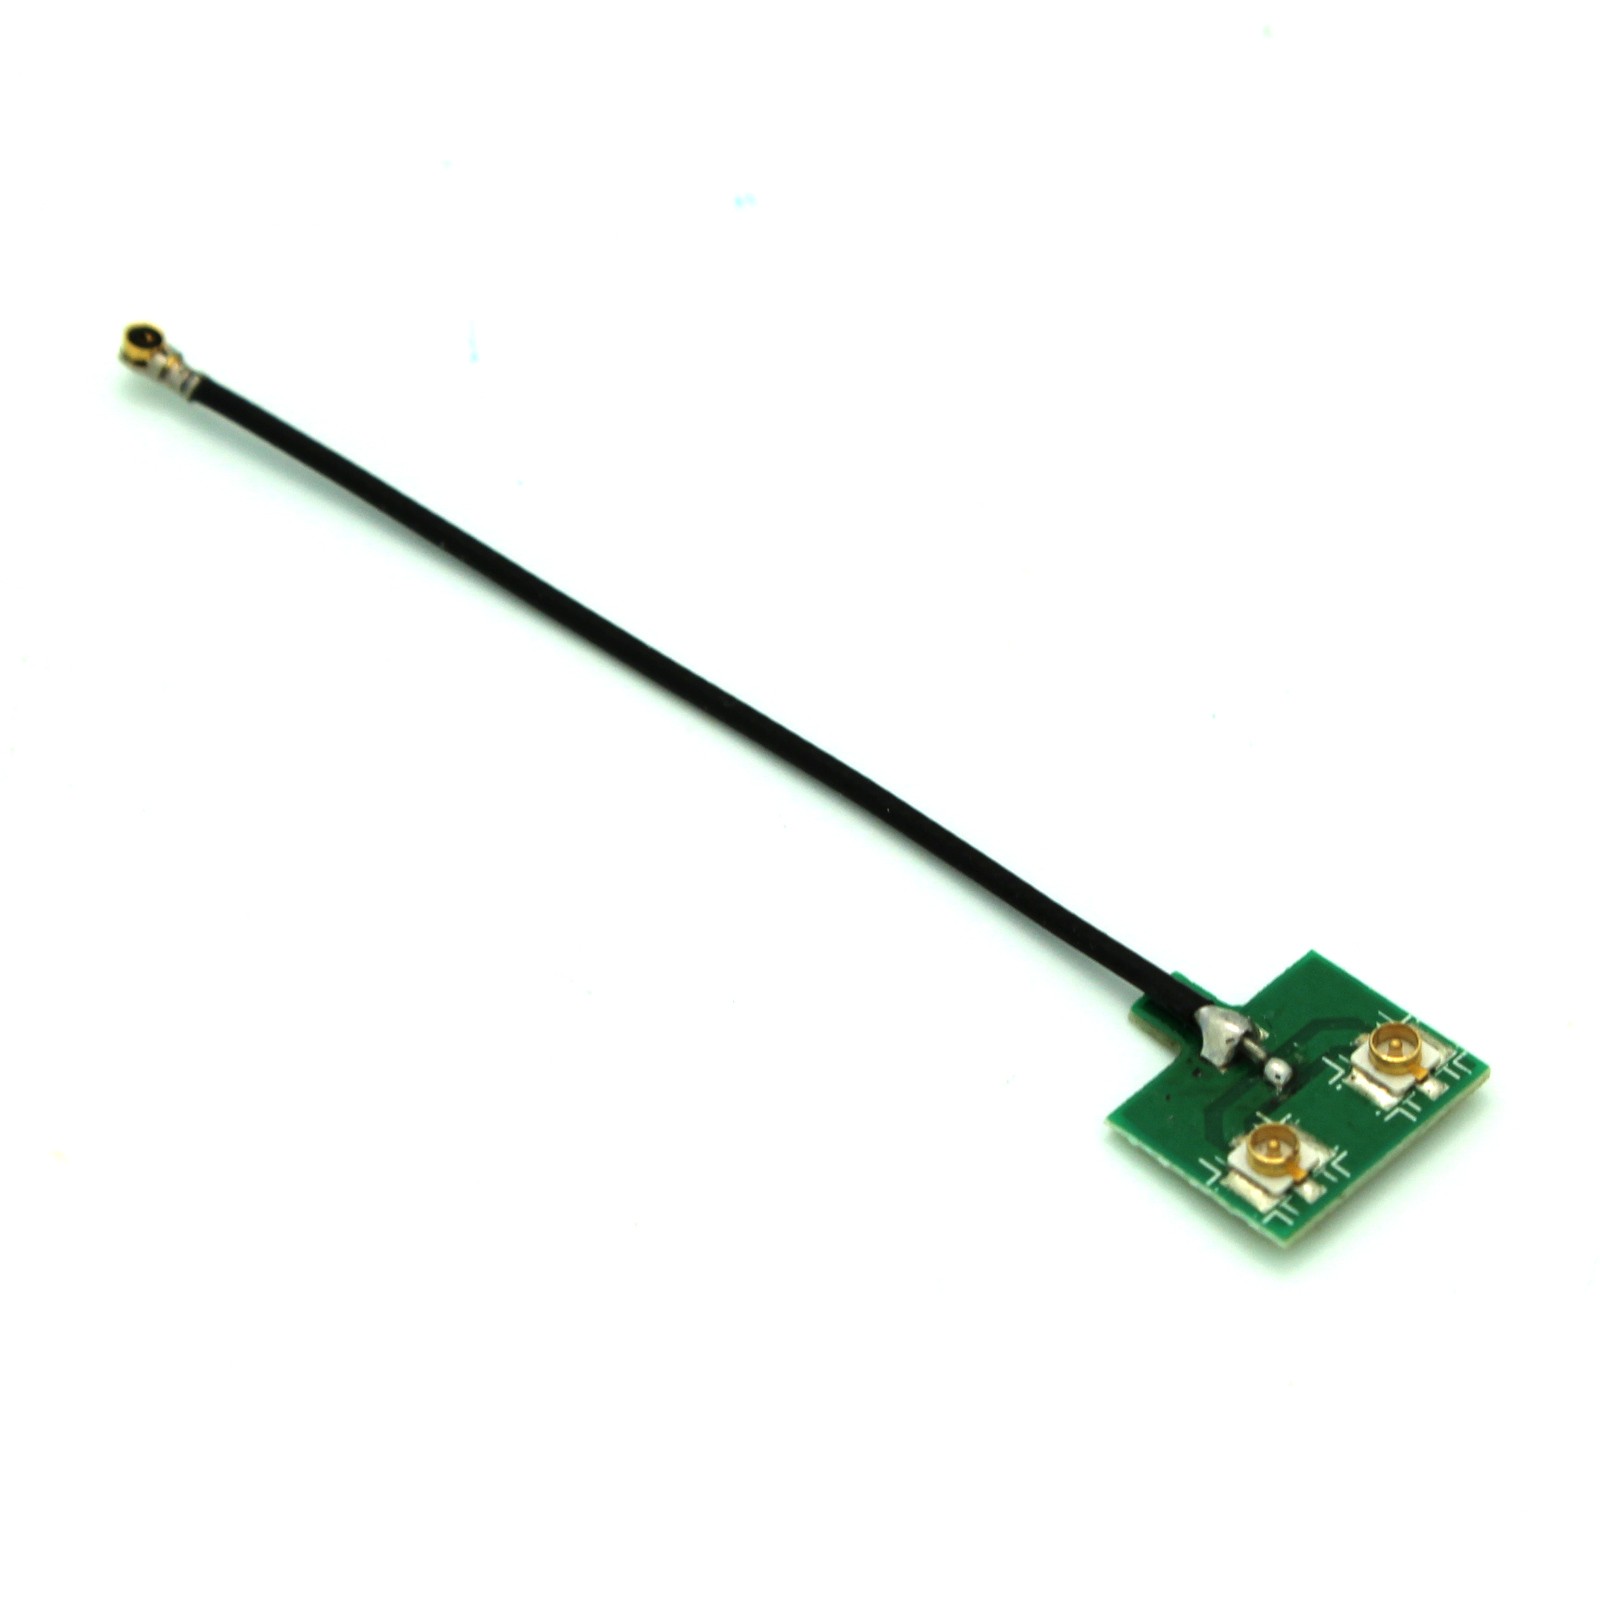 499 Mhf4 To Ipex Ipx Ufl Ufl Pcb Antenna Connector Splitter Tinkersphere 